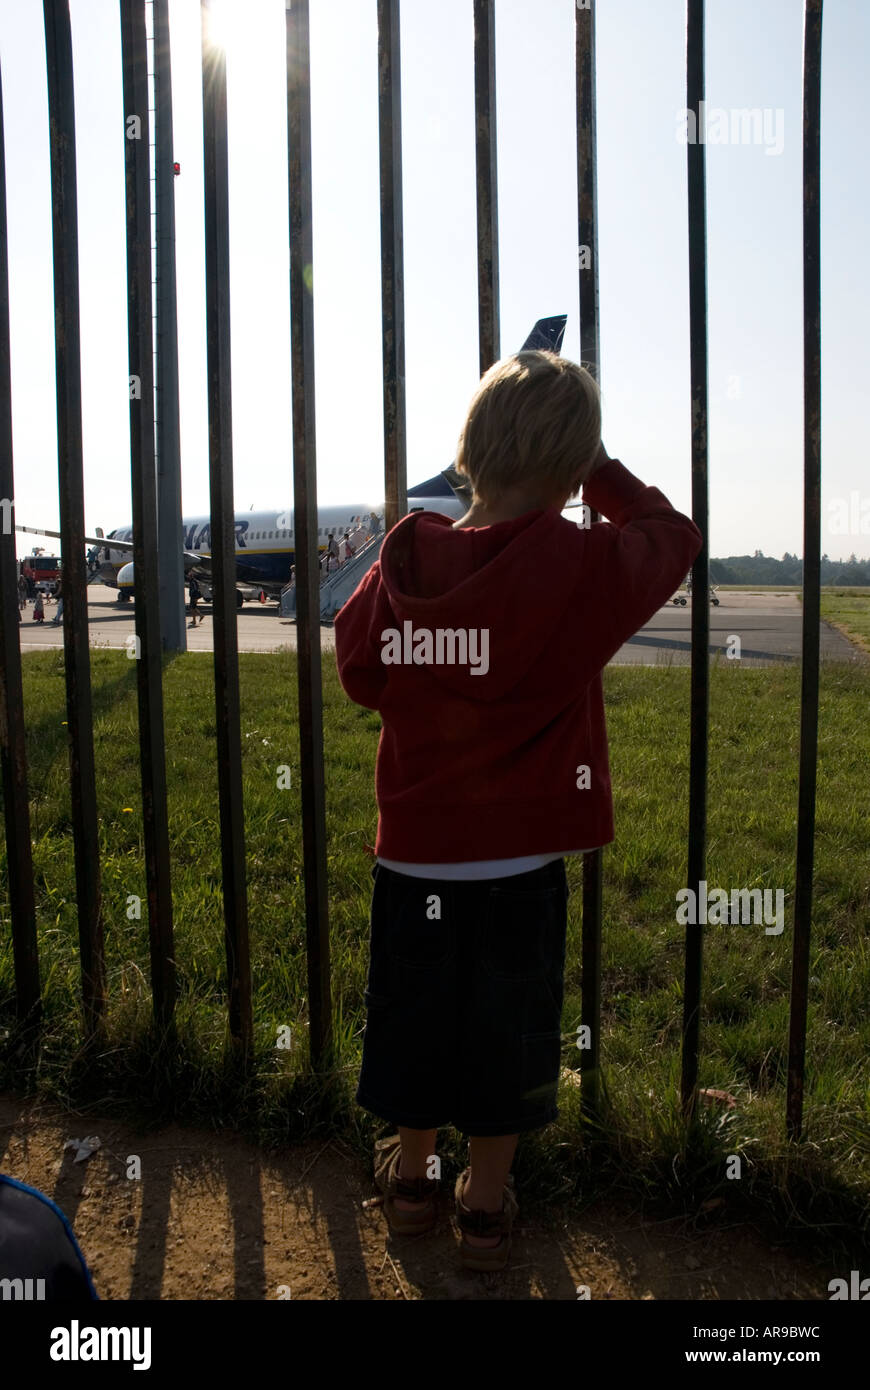 Image of a small boy saying goodbye to members of his family at the aeroport Stock Photo